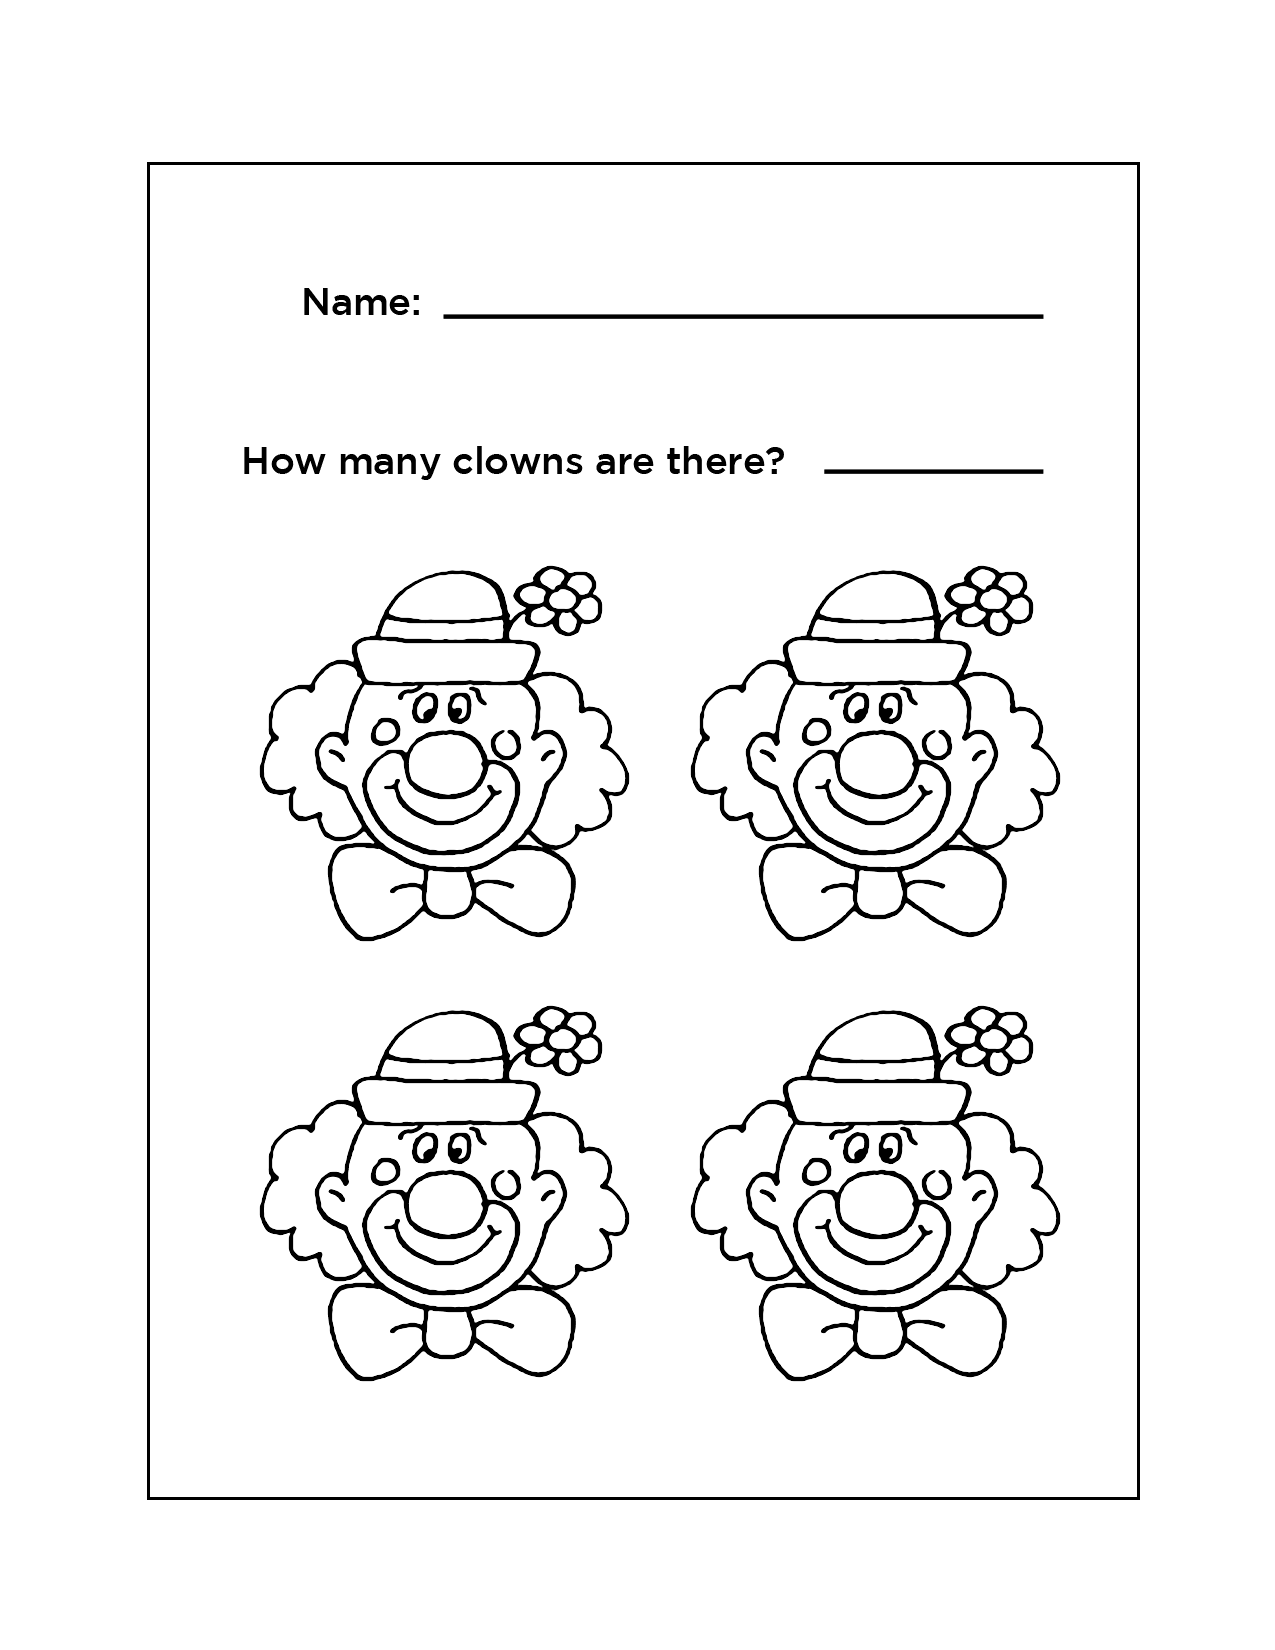 Count And Color The Clowns Worksheet